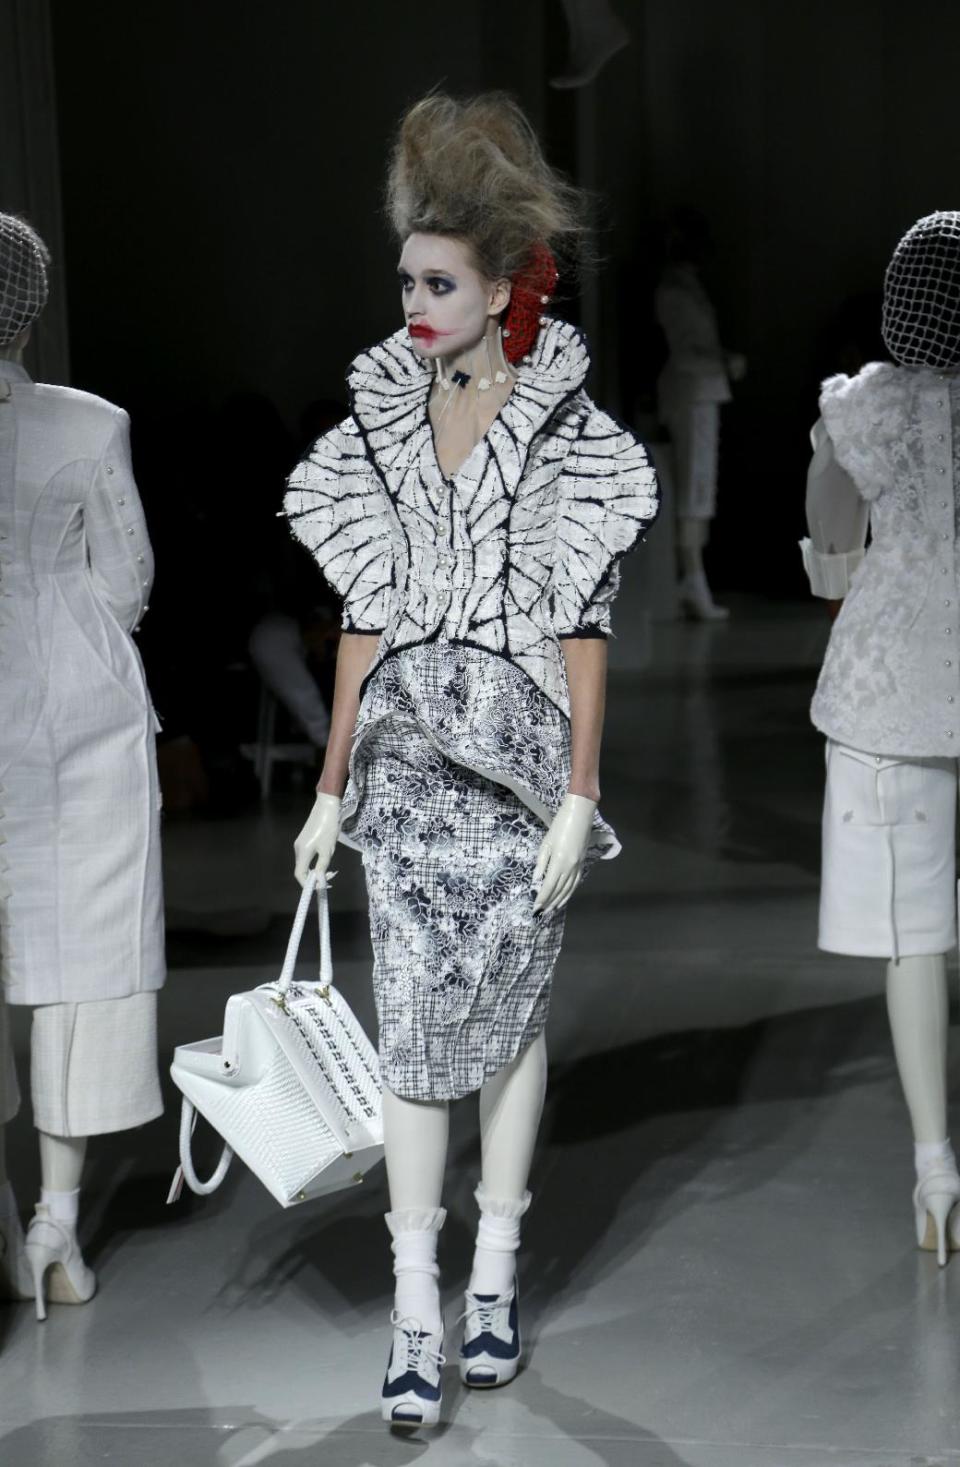 The Thom Browne Spring 2014 collection is modeled during Fashion Week in New York, Monday, Sept. 9, 2013. (AP Photo/Seth Wenig)